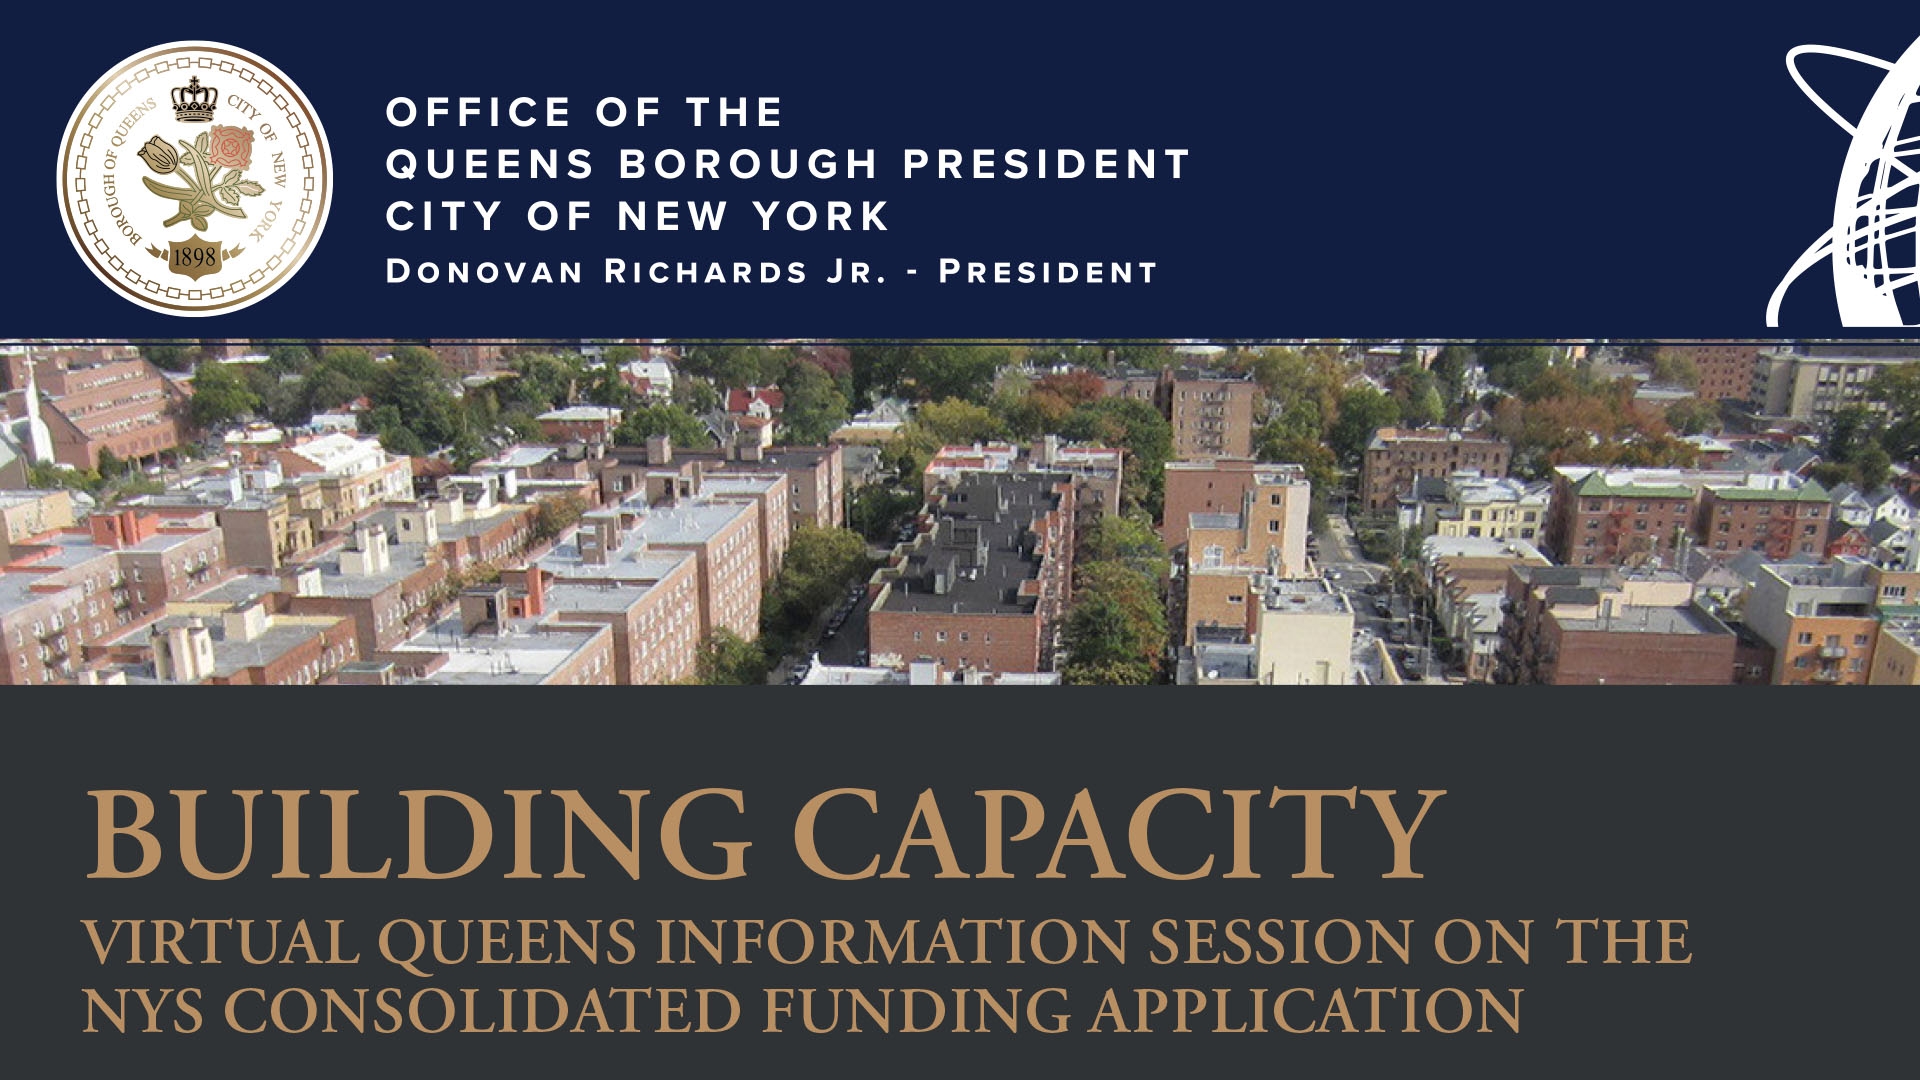 BUILDING CAPACITY VIRTUAL QUEENS INFORMATION SESSION ON THE NYS